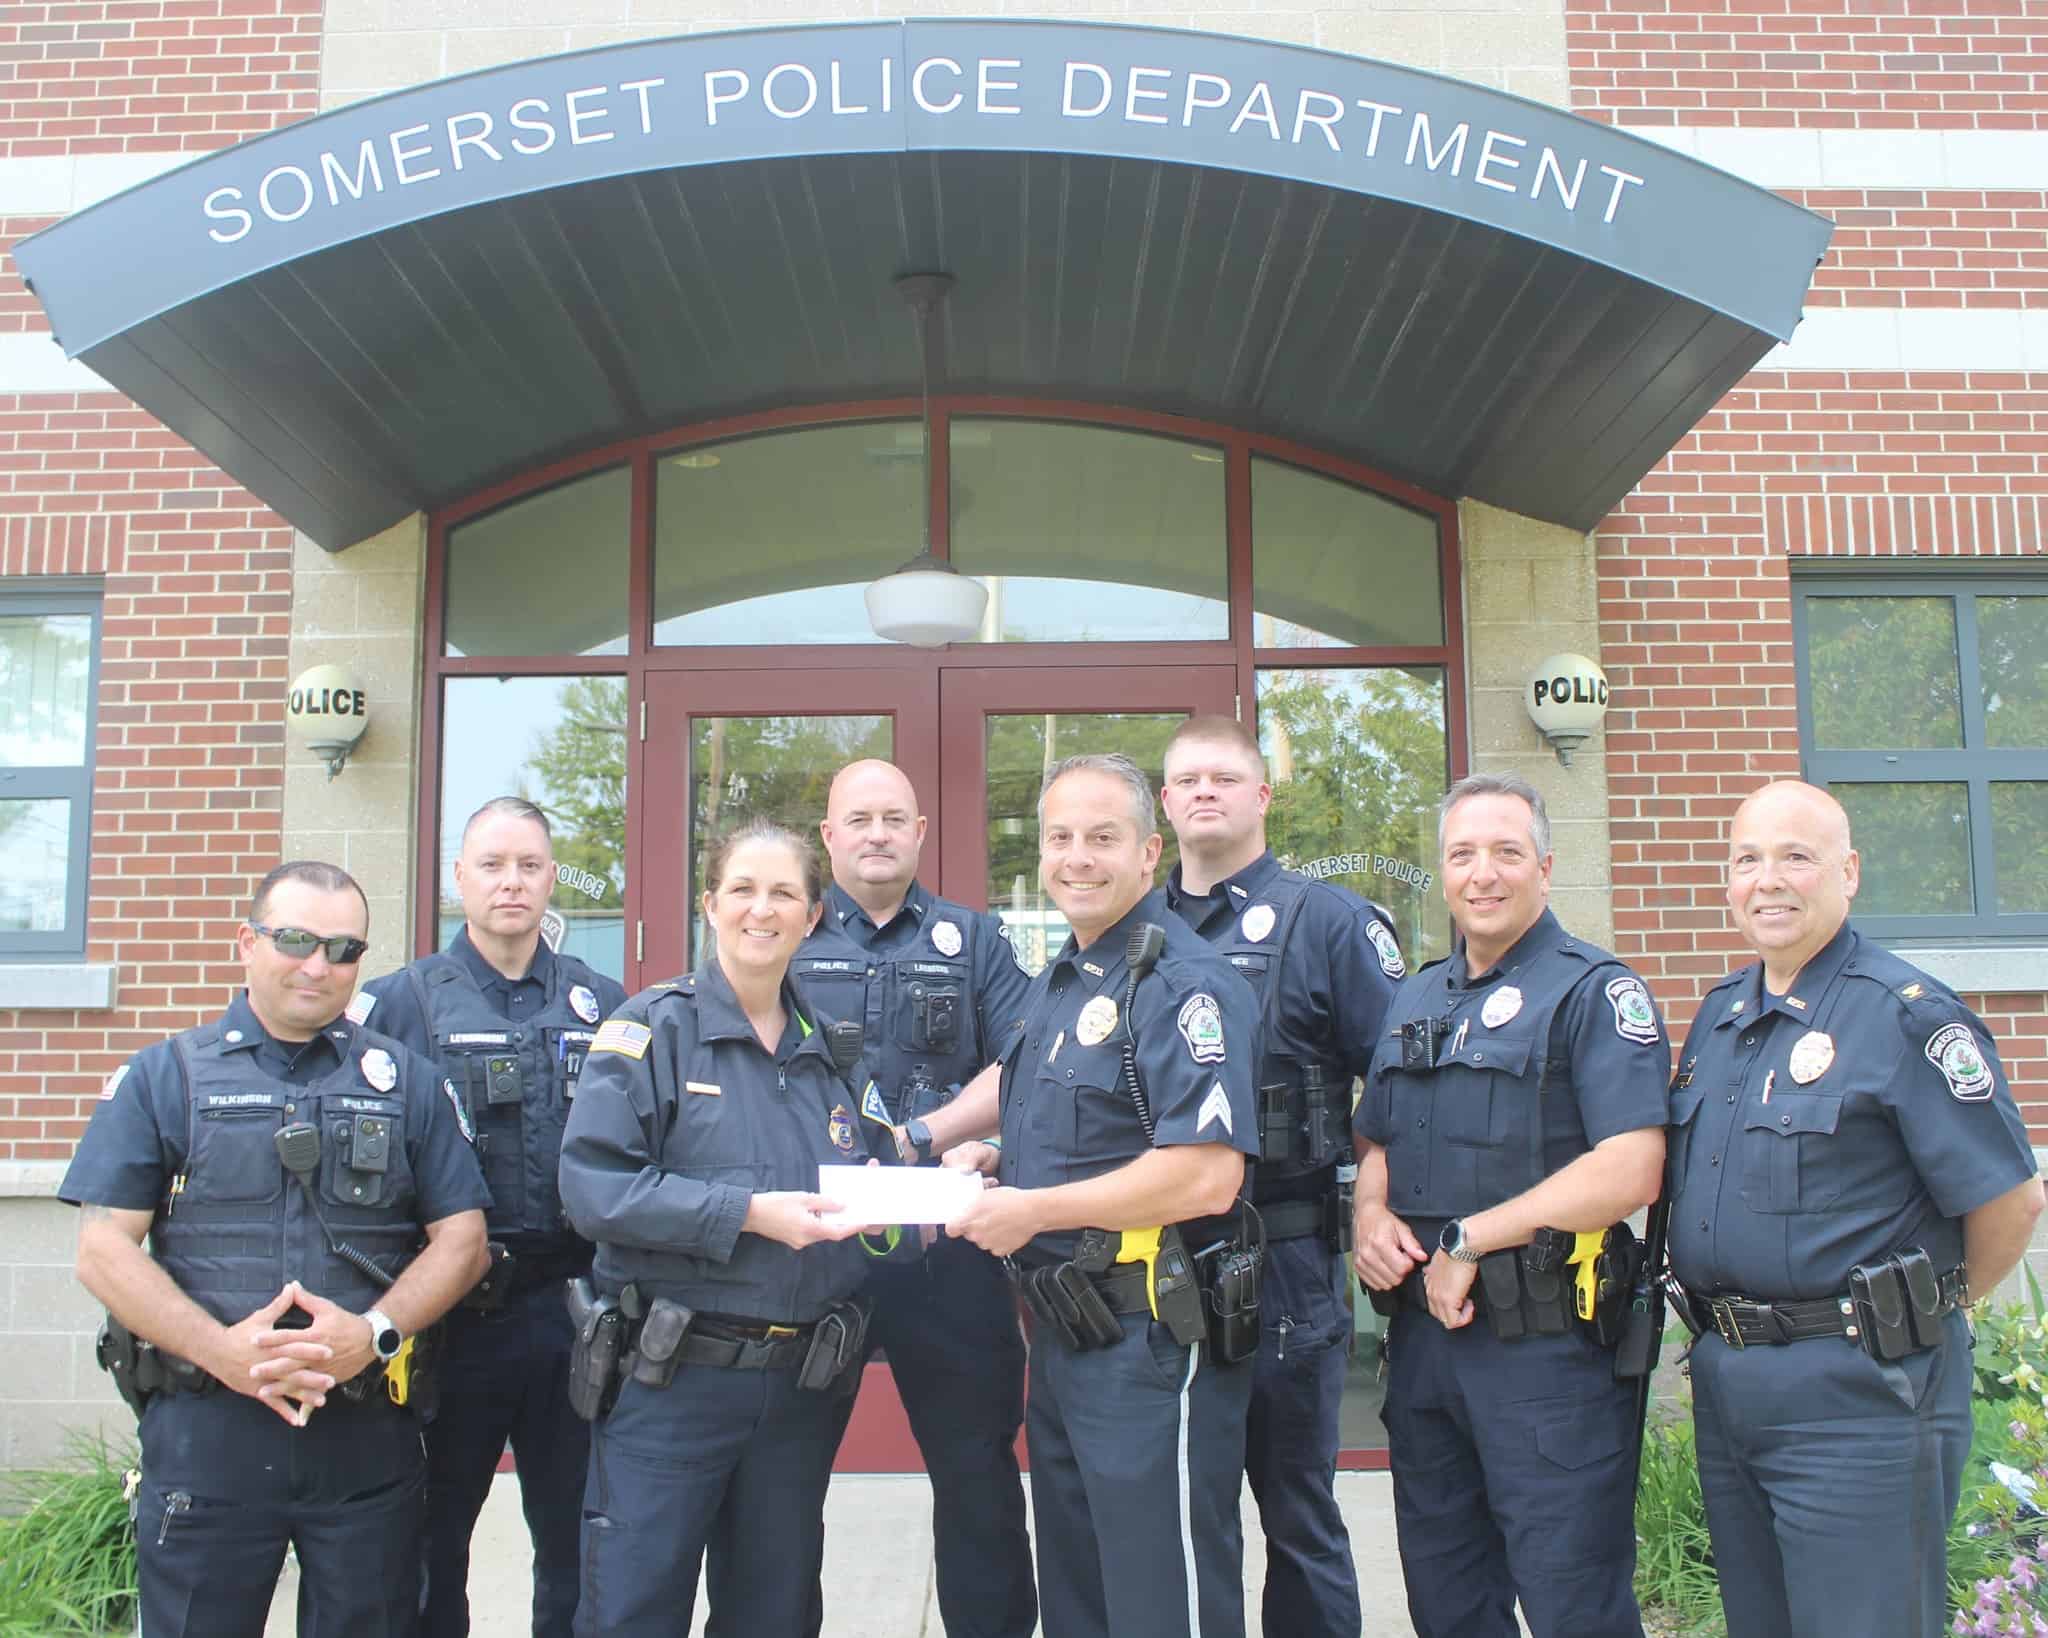 Chief Helena Rafferty accepted an $8,000.00 donation check from the officers of the Somerset Police department